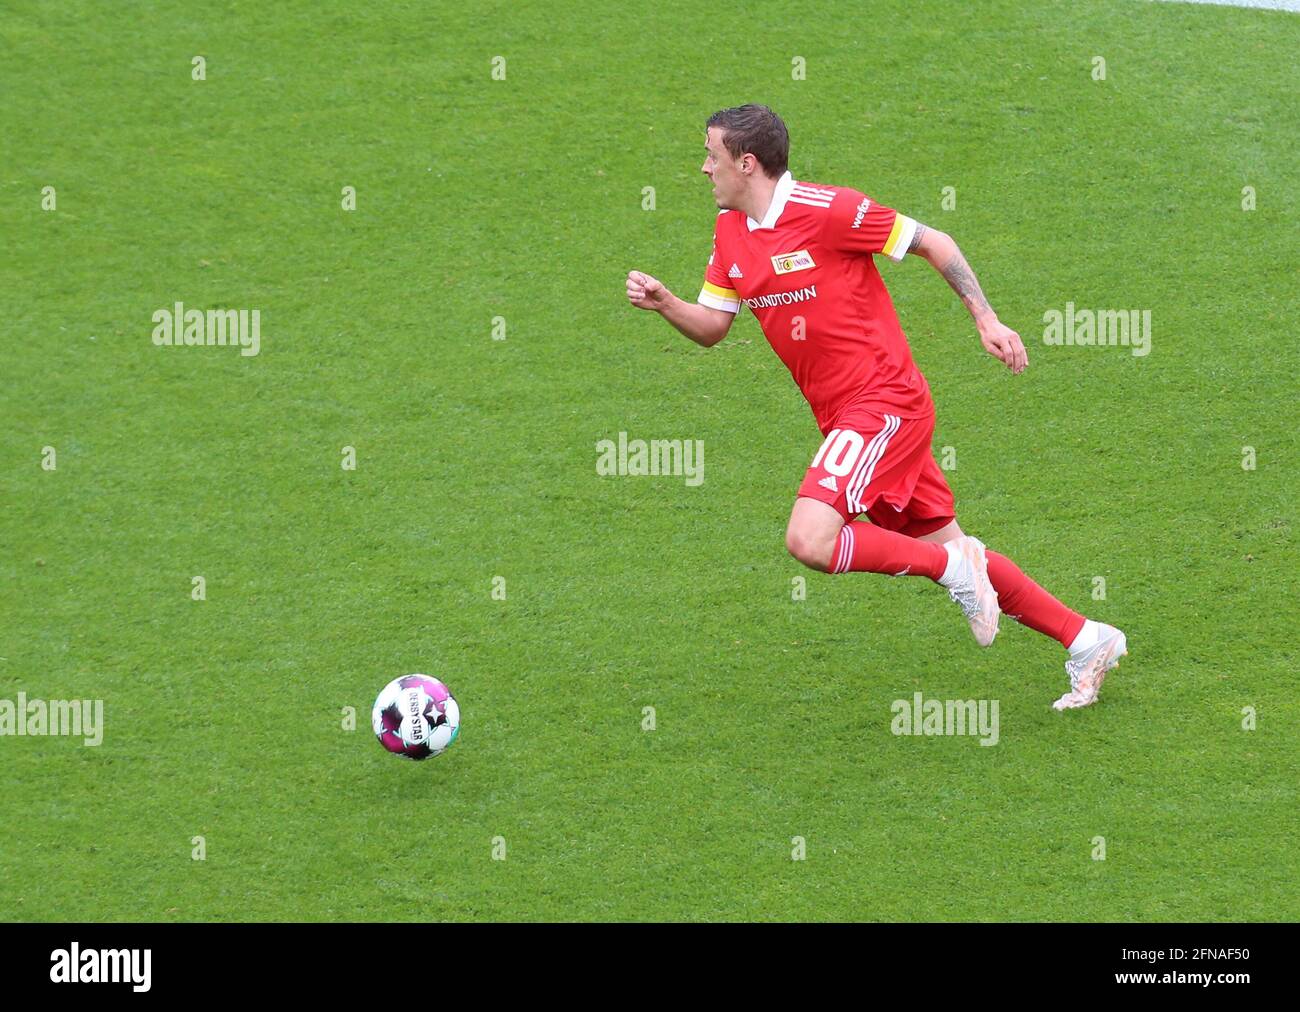 Leverkusen, Germany. 15th May, 2021. Bundesliga, matchday 33, Bayer 04 Leverkusen vs 1. FC Union Berlin, Max Kruse (Union) controls the ball. DFL REGULATIONS PROHIBIT ANY USE OF PHOTOGRAPHS AS IMAGE SEQUENCES AND/OR QUASI-VIDEO Credit: Juergen Schwarz/Alamy Live News Stock Photo